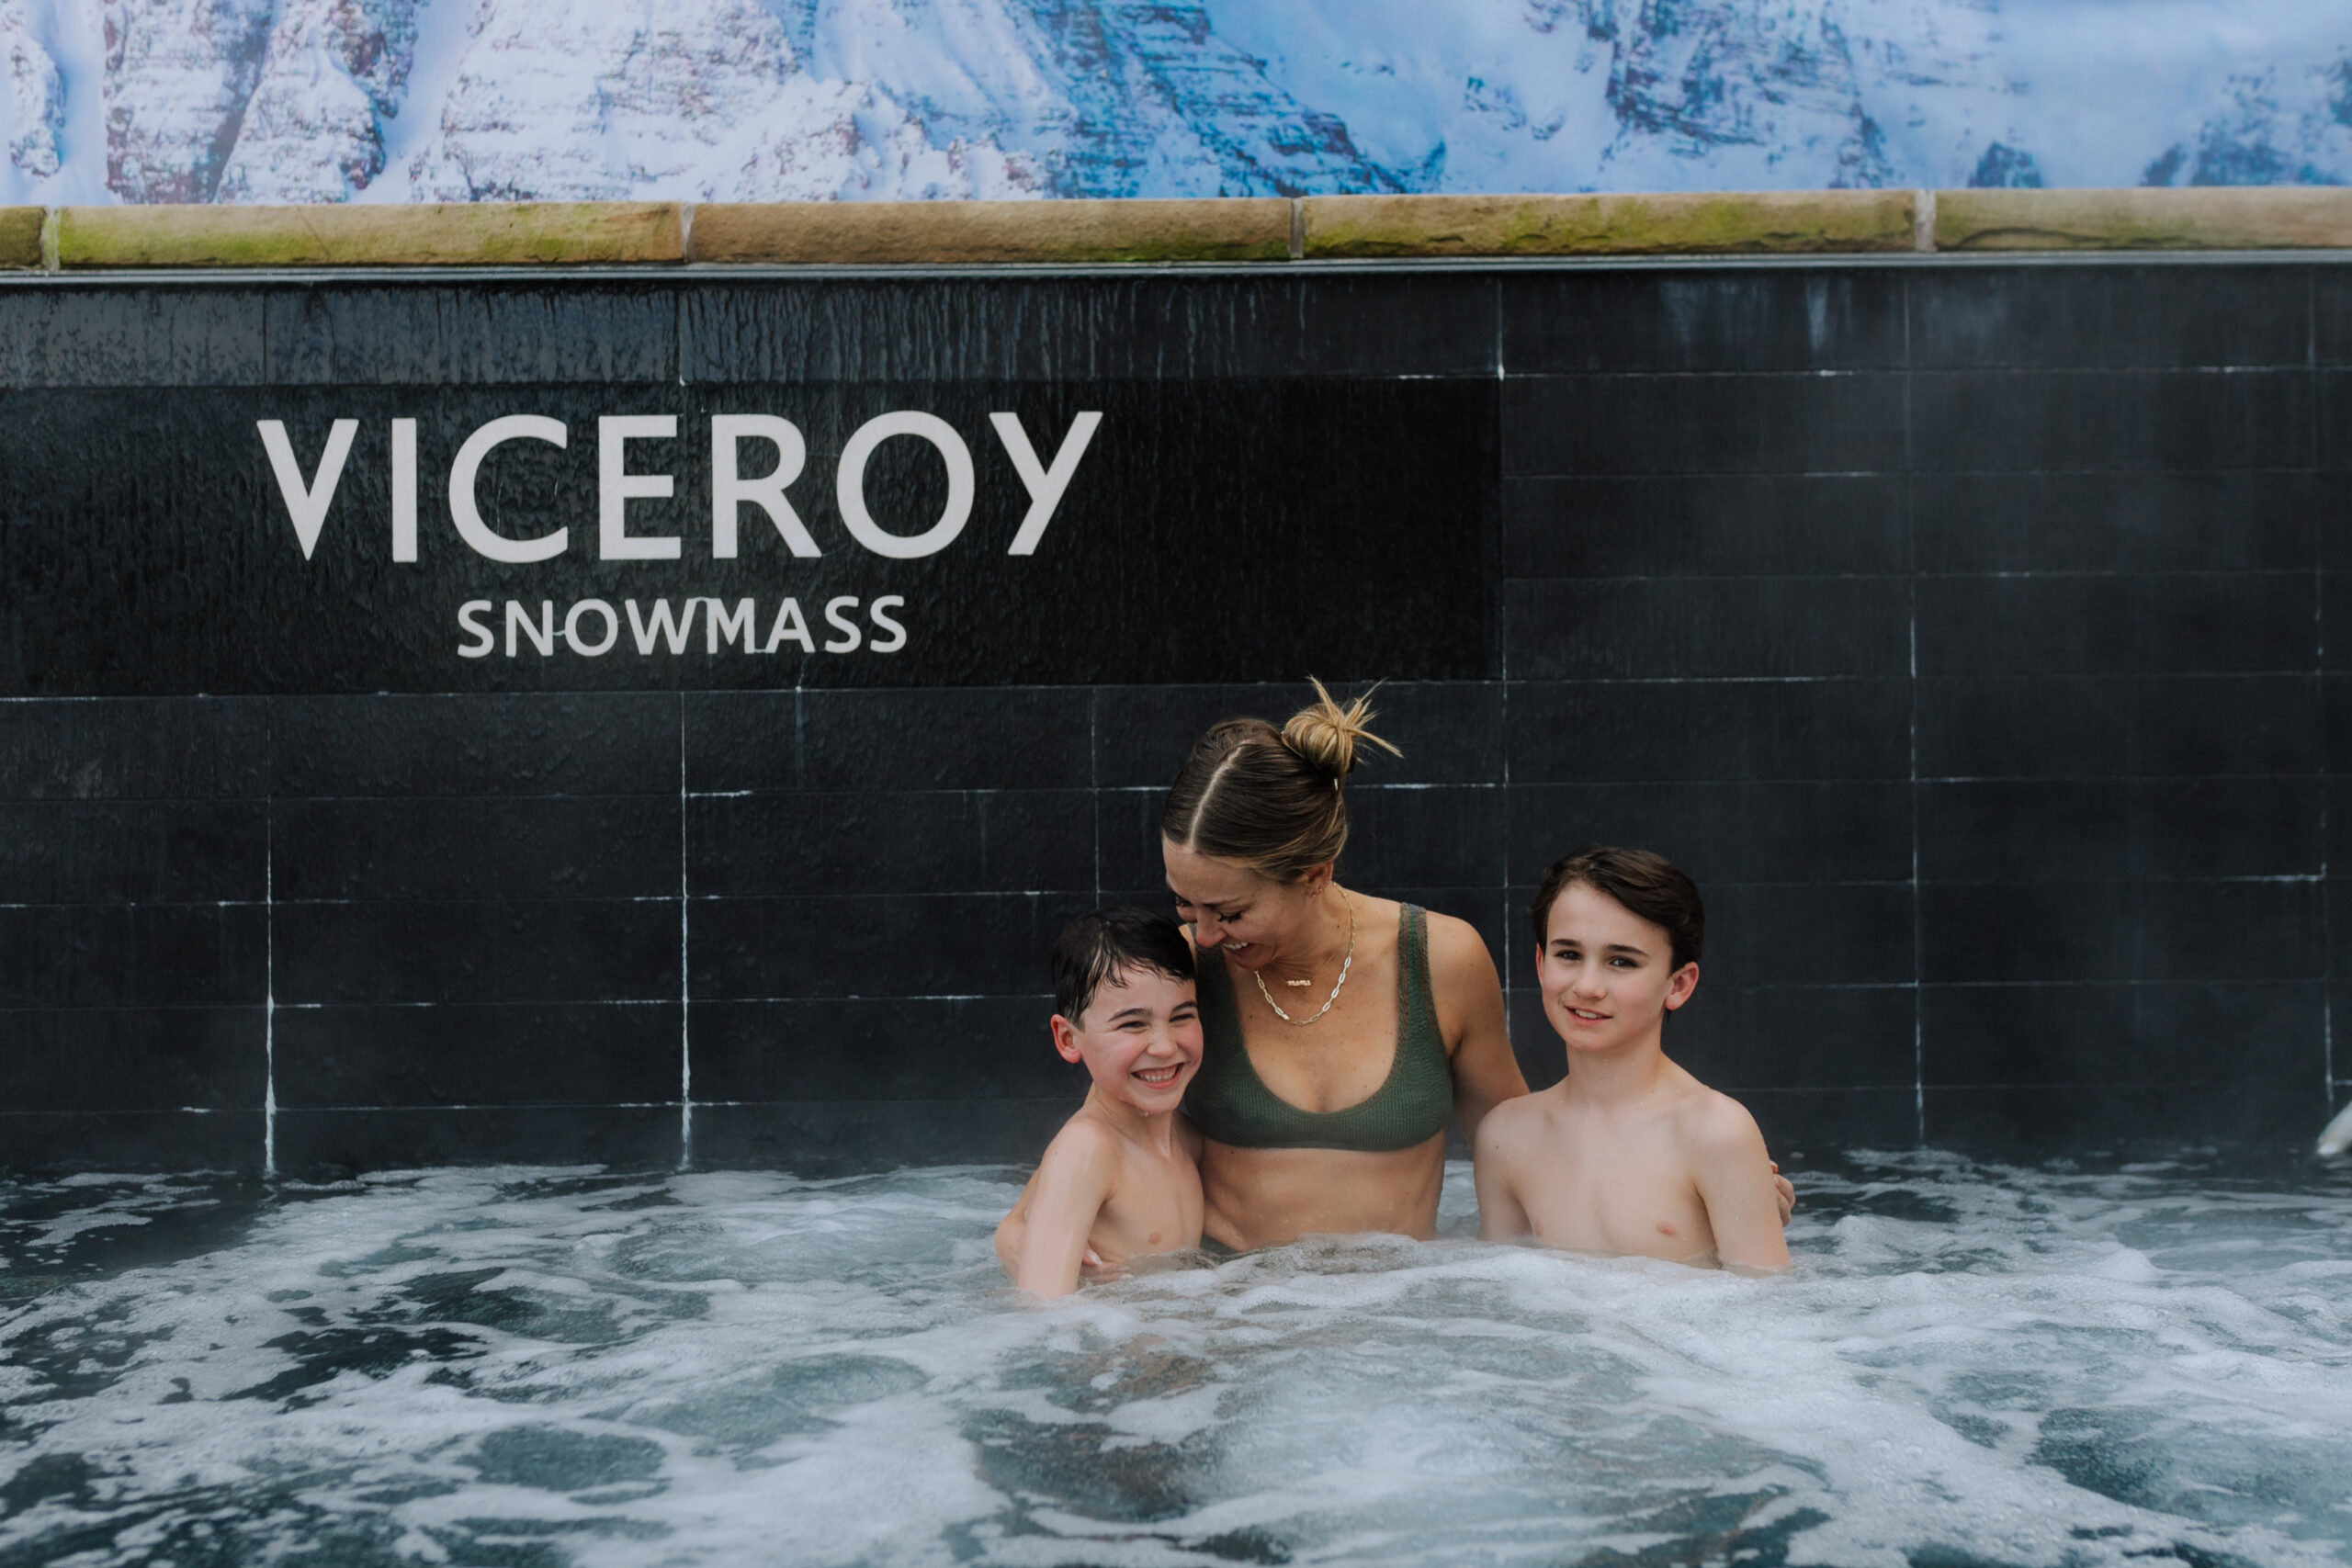 love a nice soak in the hot tub after a long day on the slopes #apresski #familyapres #theldltravels #skisnowmass #aspensnowmass